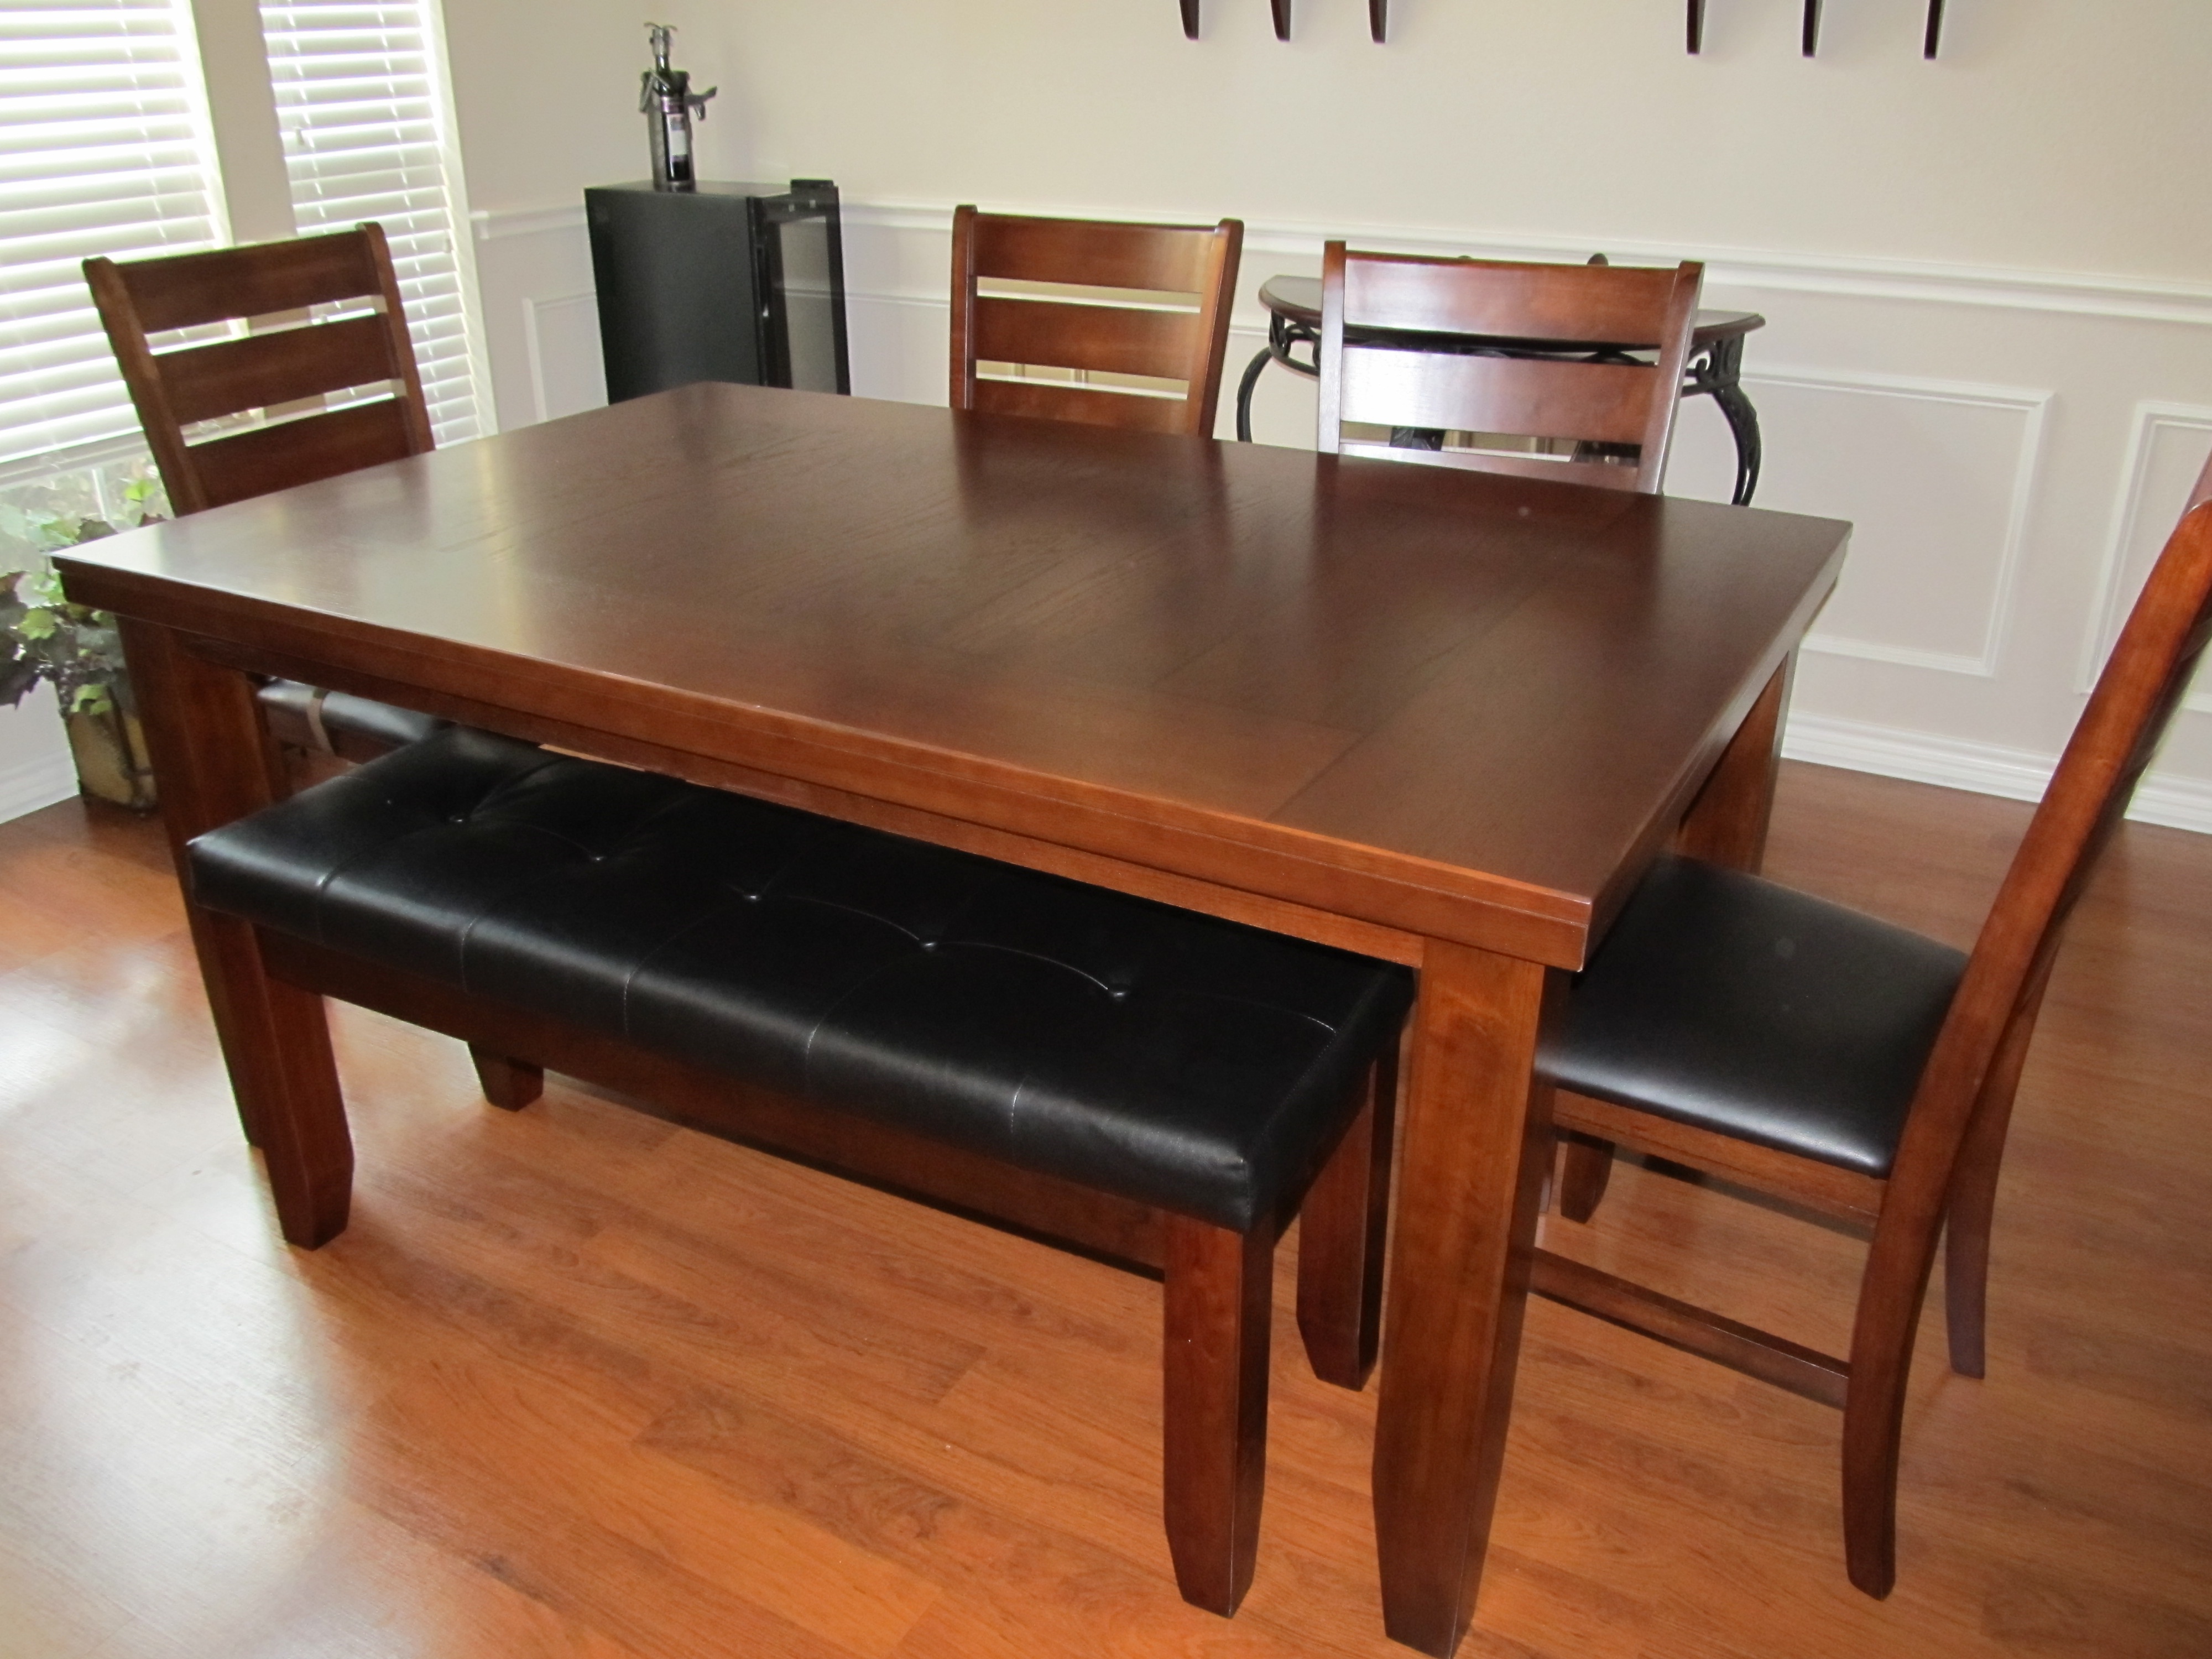 bench vs dining room table